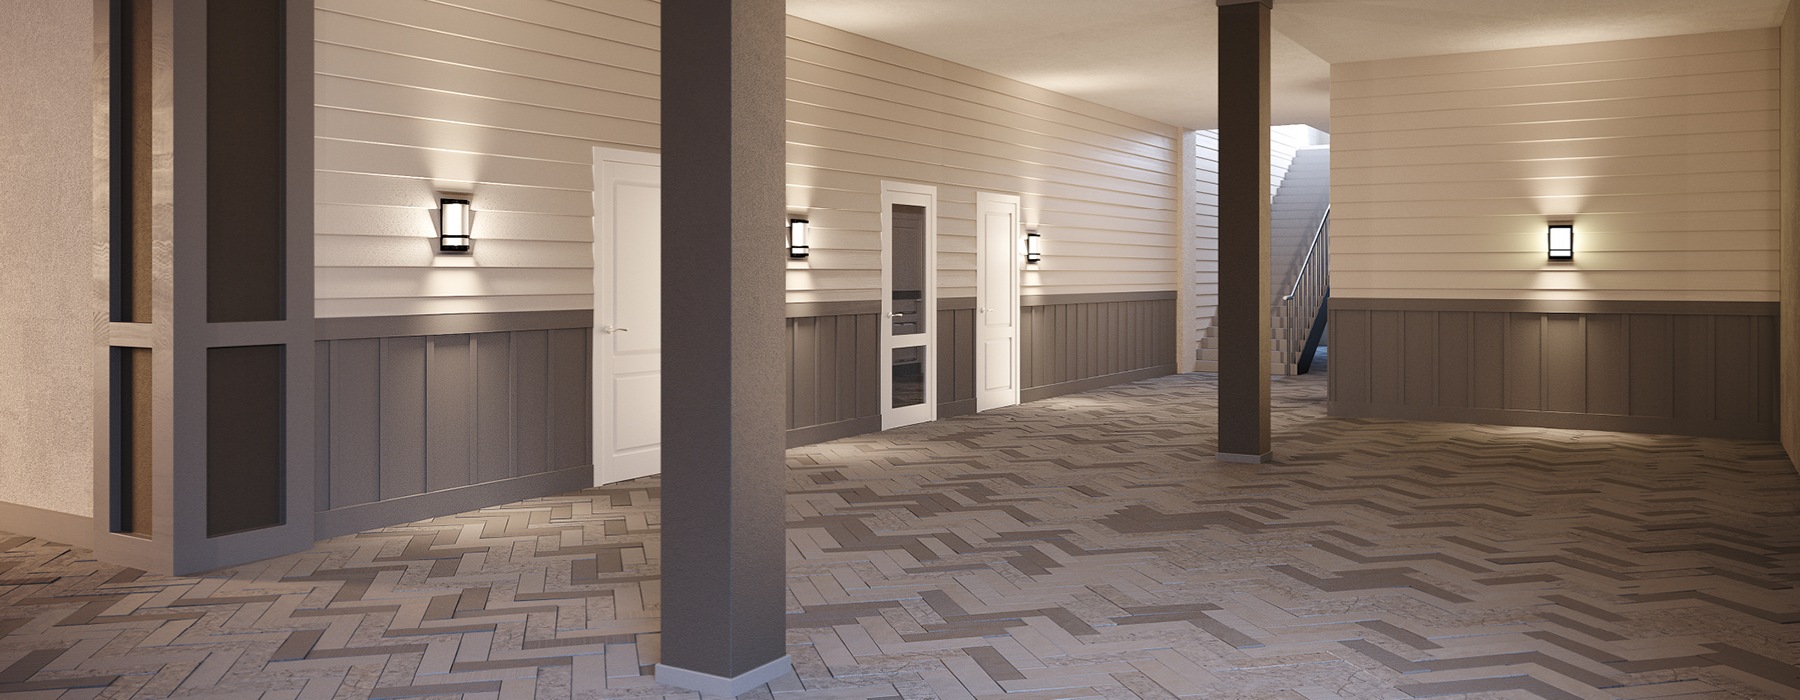 Covered Breezeway with crossed stone floor and external lights